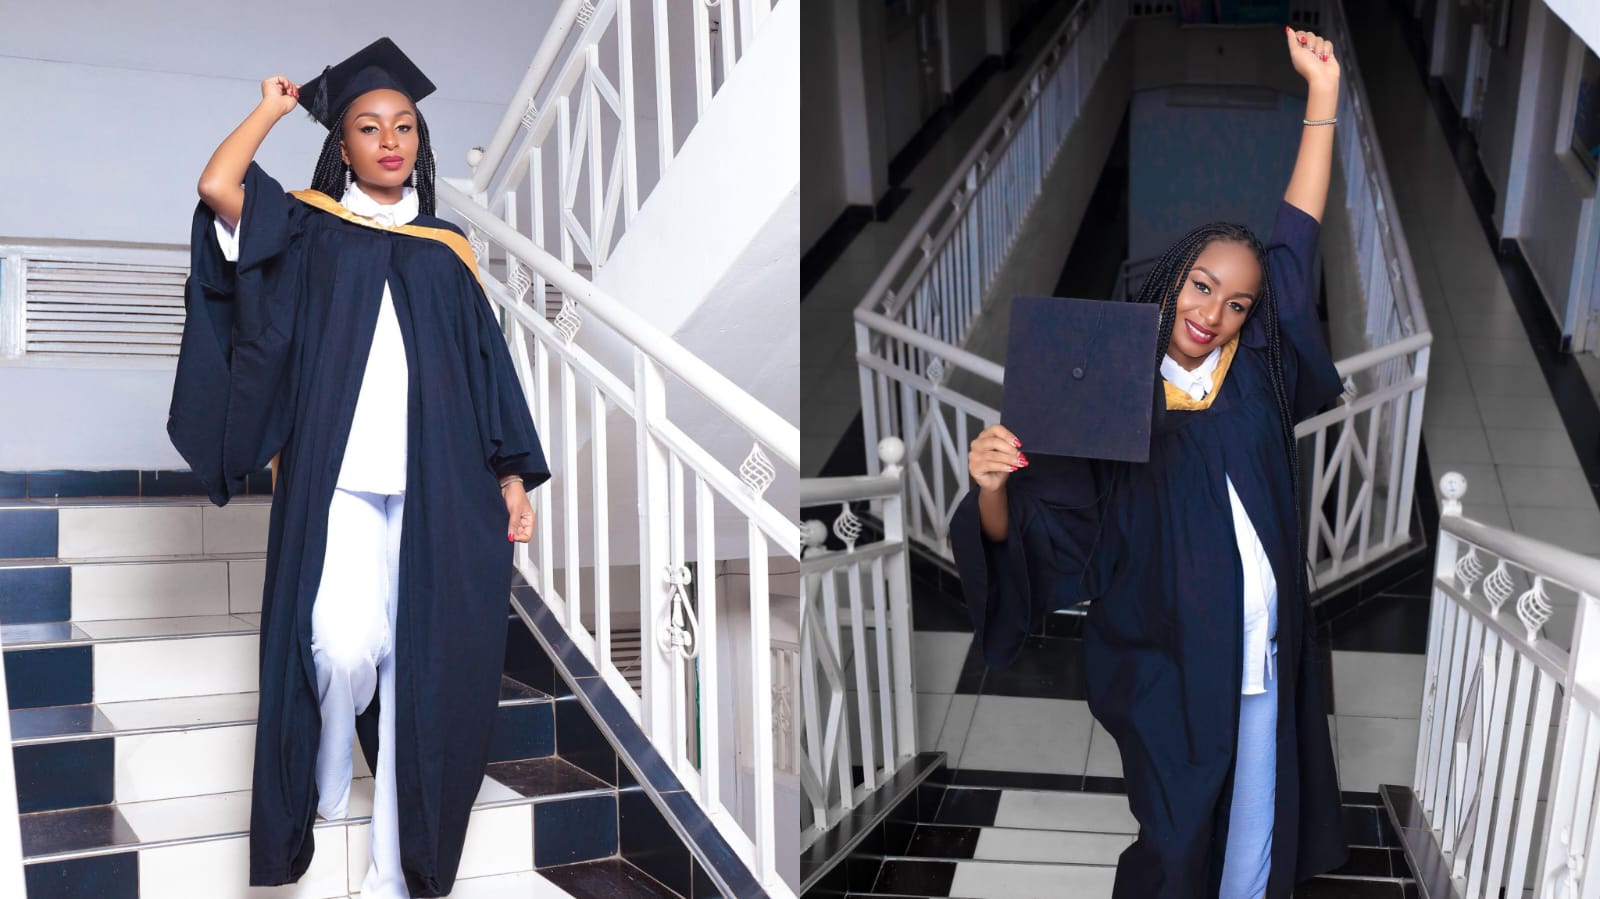 Ruth K Graduates With a degree in Education